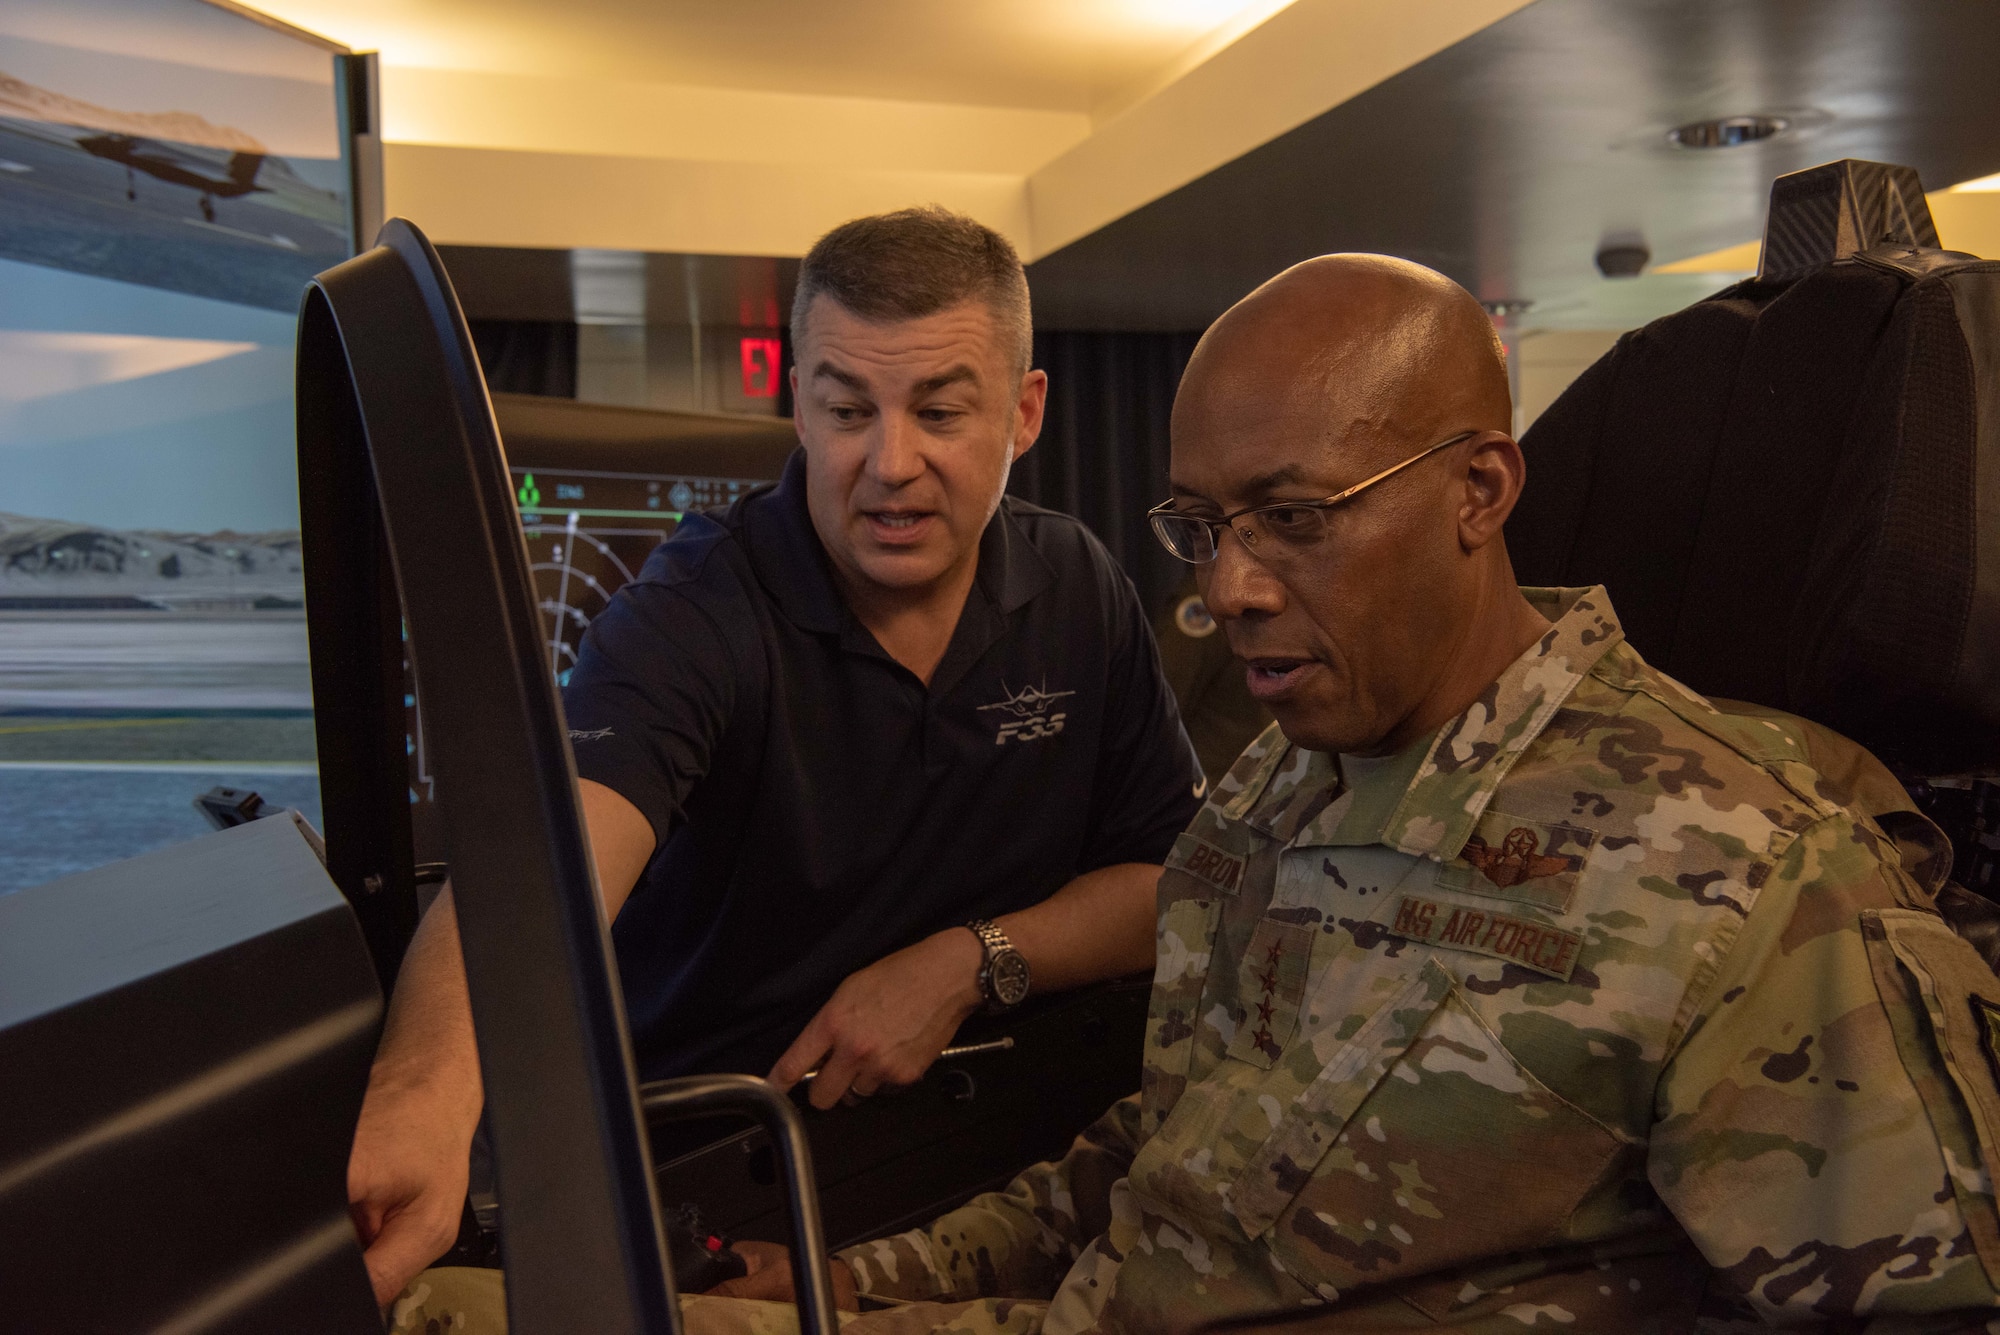 Adrean Clark, Lockheed Martin Operations analyst, demonstrates how to read the displays in the F-35 simulator to U.S. Air Force Gen. CQ Brown, Jr., Pacific Air Forces commander, during the Pacific F-35 Users Group Conference at Joint Base Pearl Harbor-Hickam, Hawaii, March 12, 2019.